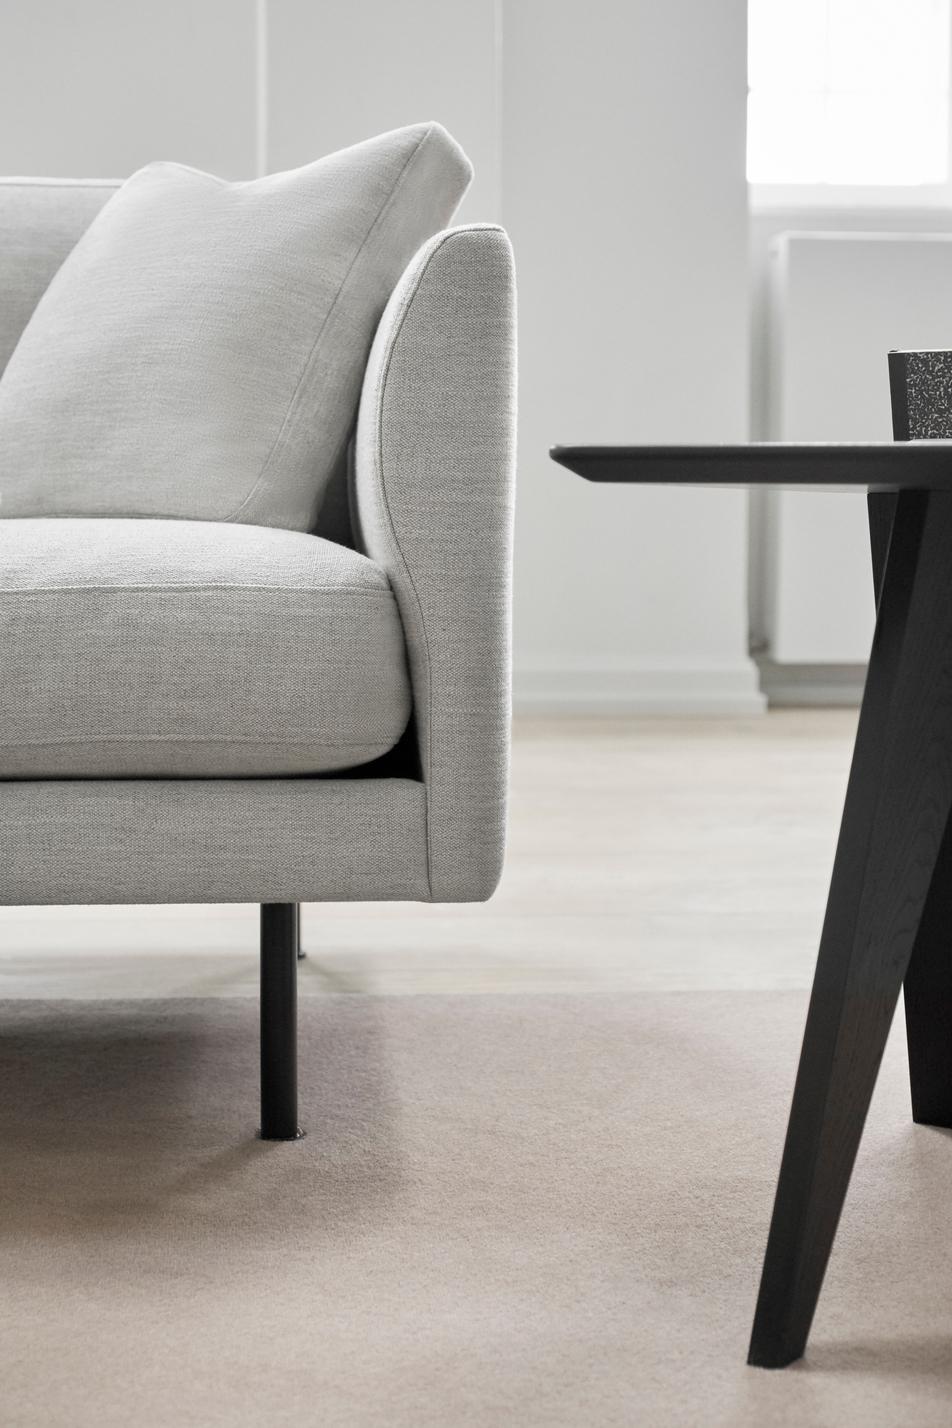 Magazine Side Table M6500 in Black Lacquered Oak by Jens Risom for Fredericia For Sale 3